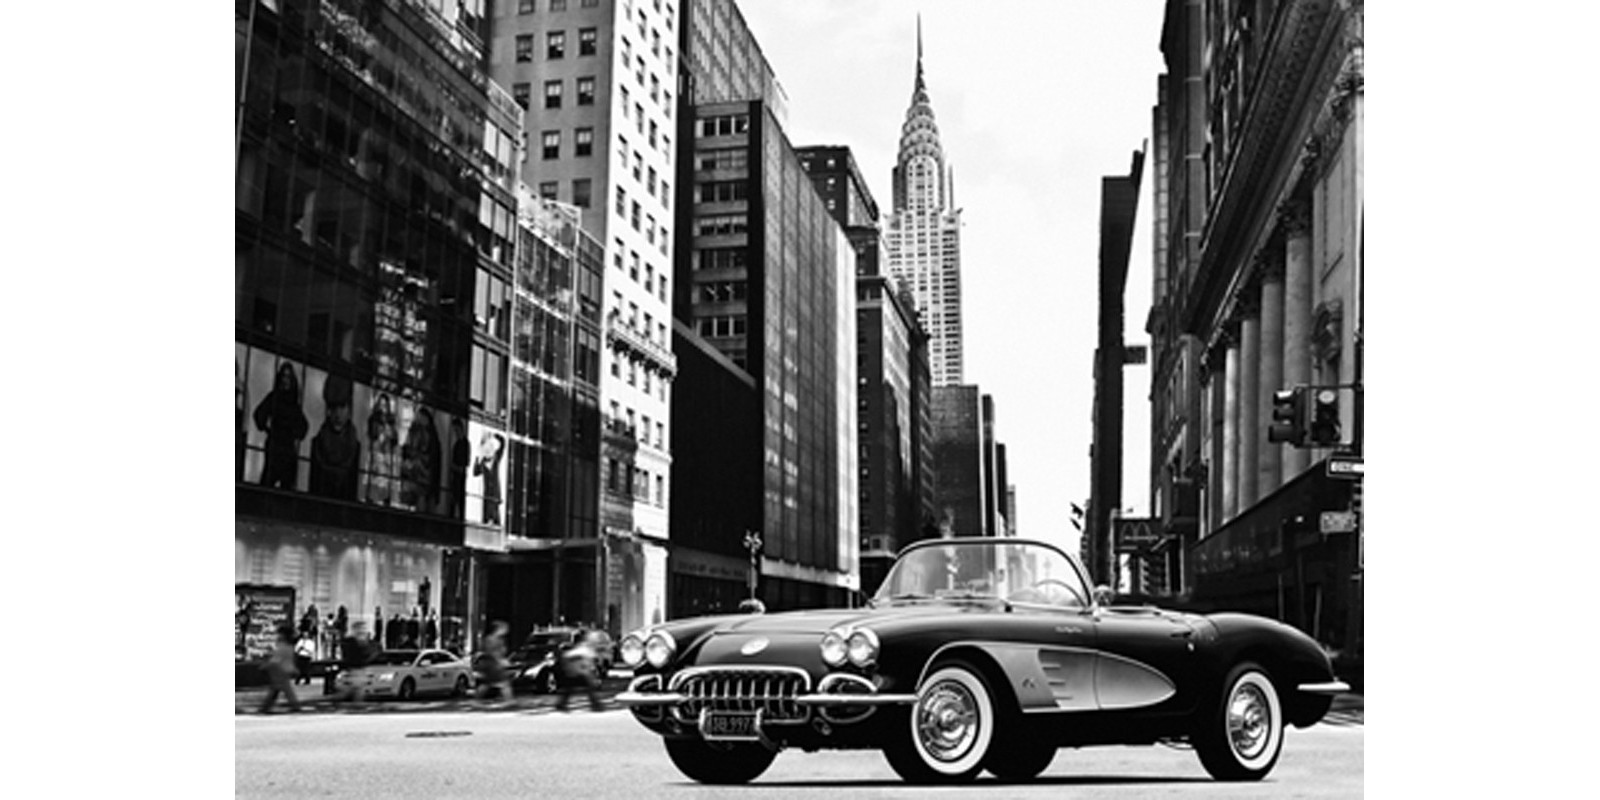 Gasoline Images - Roadster in NYC